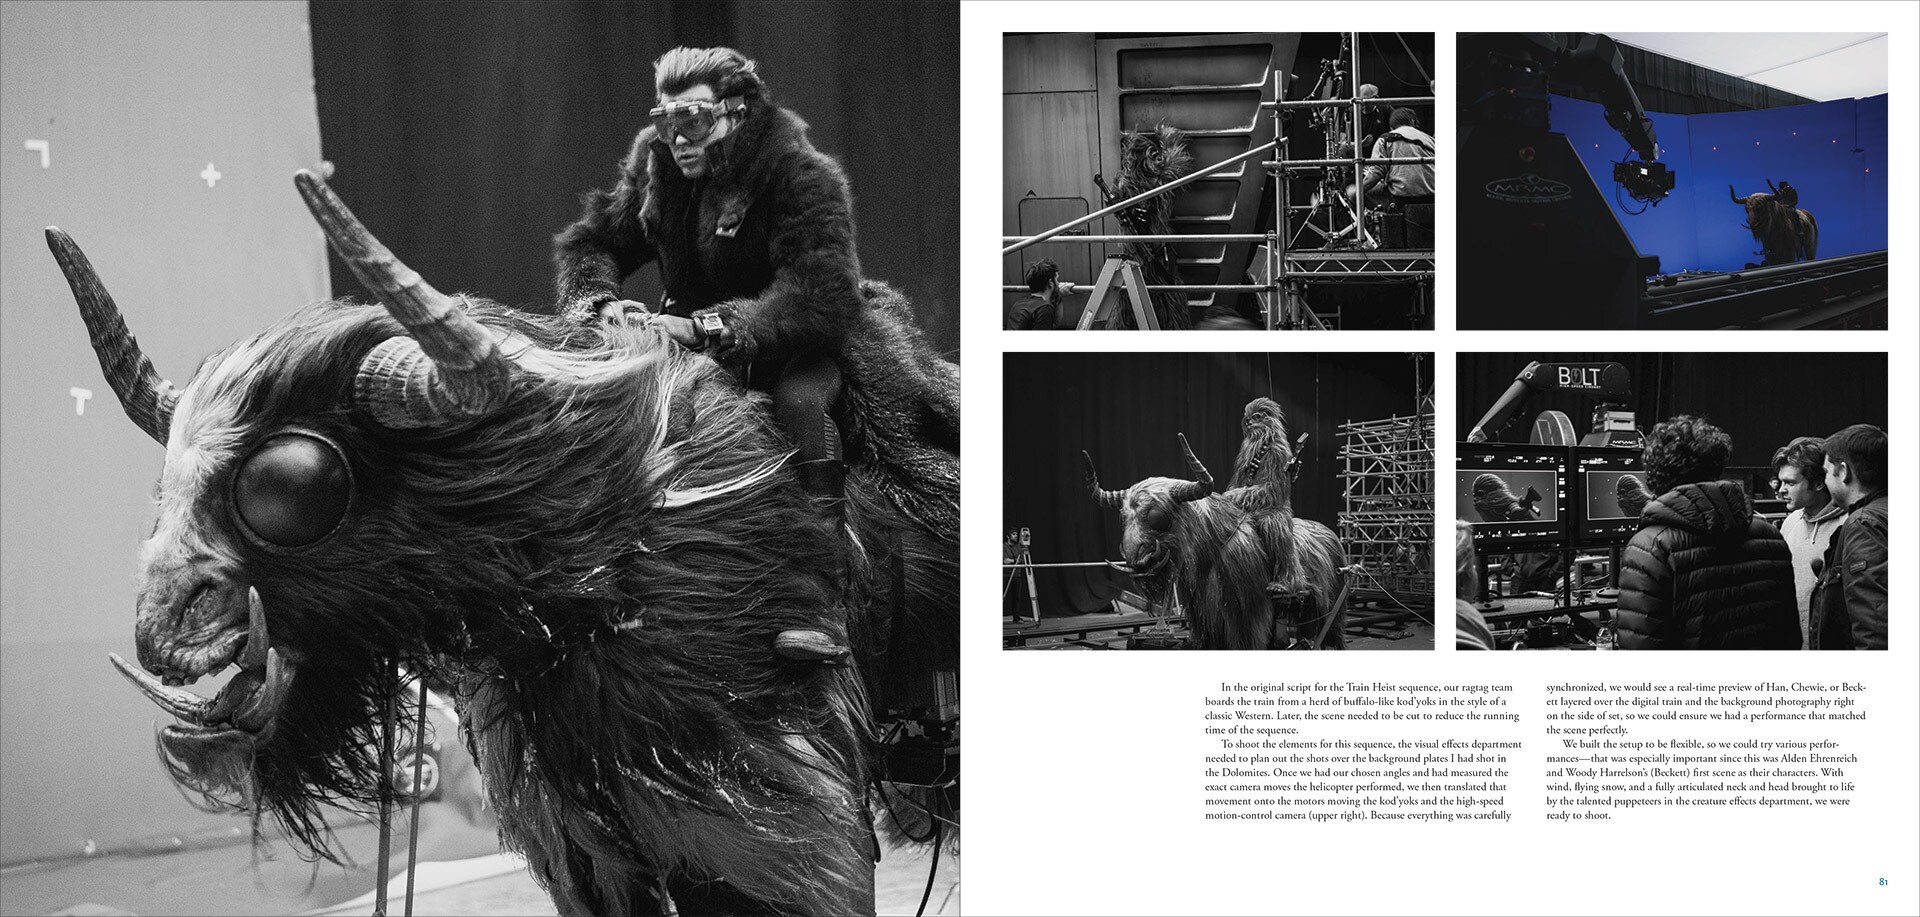 A spread from the new Making of Solo: A Star Wars Story book out now.